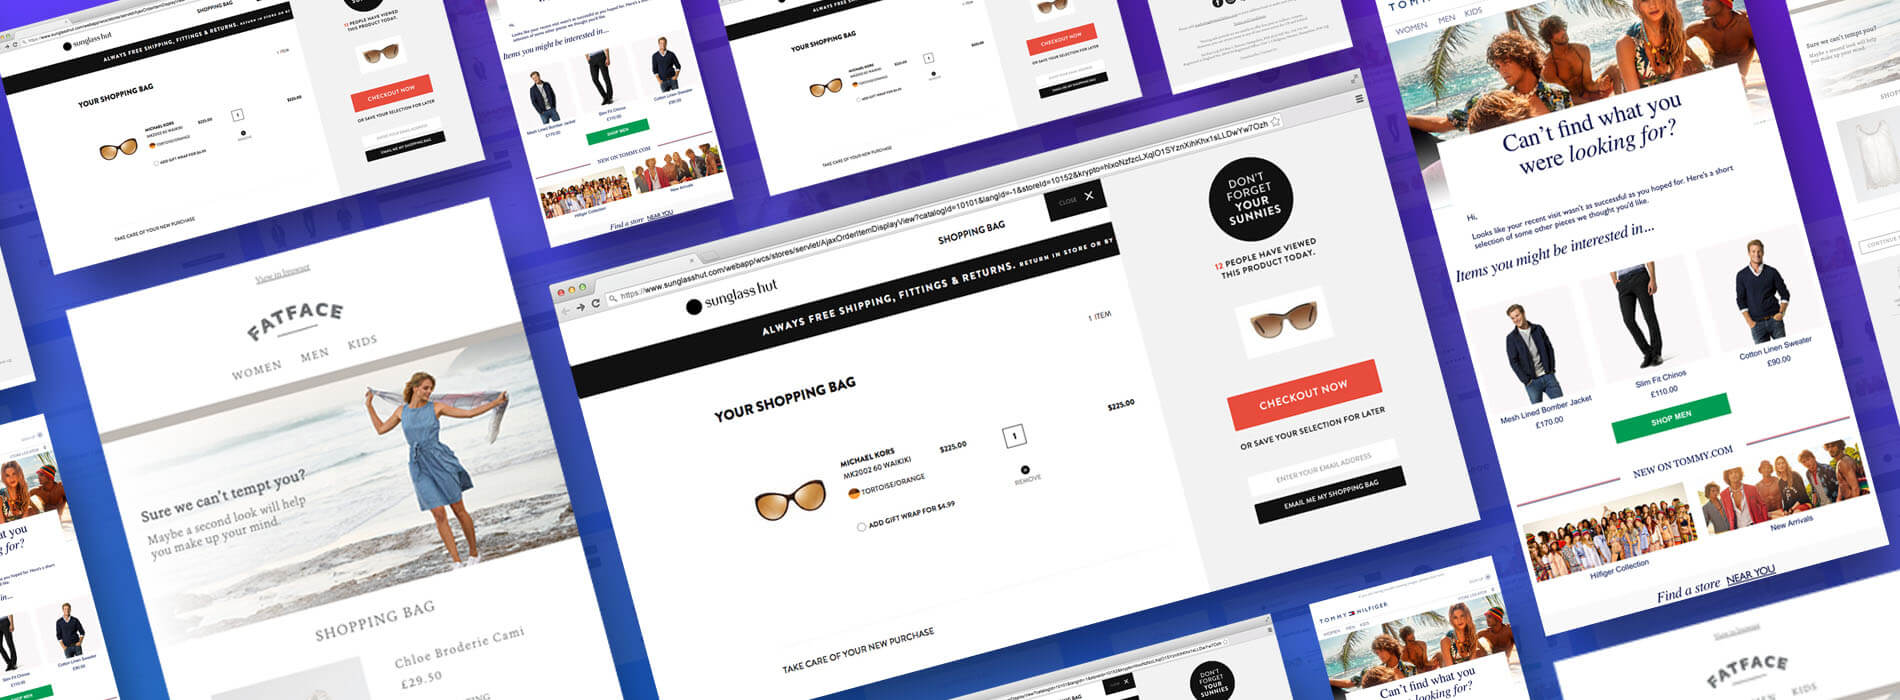 Five Examples of Personalization from Fashion Retailers